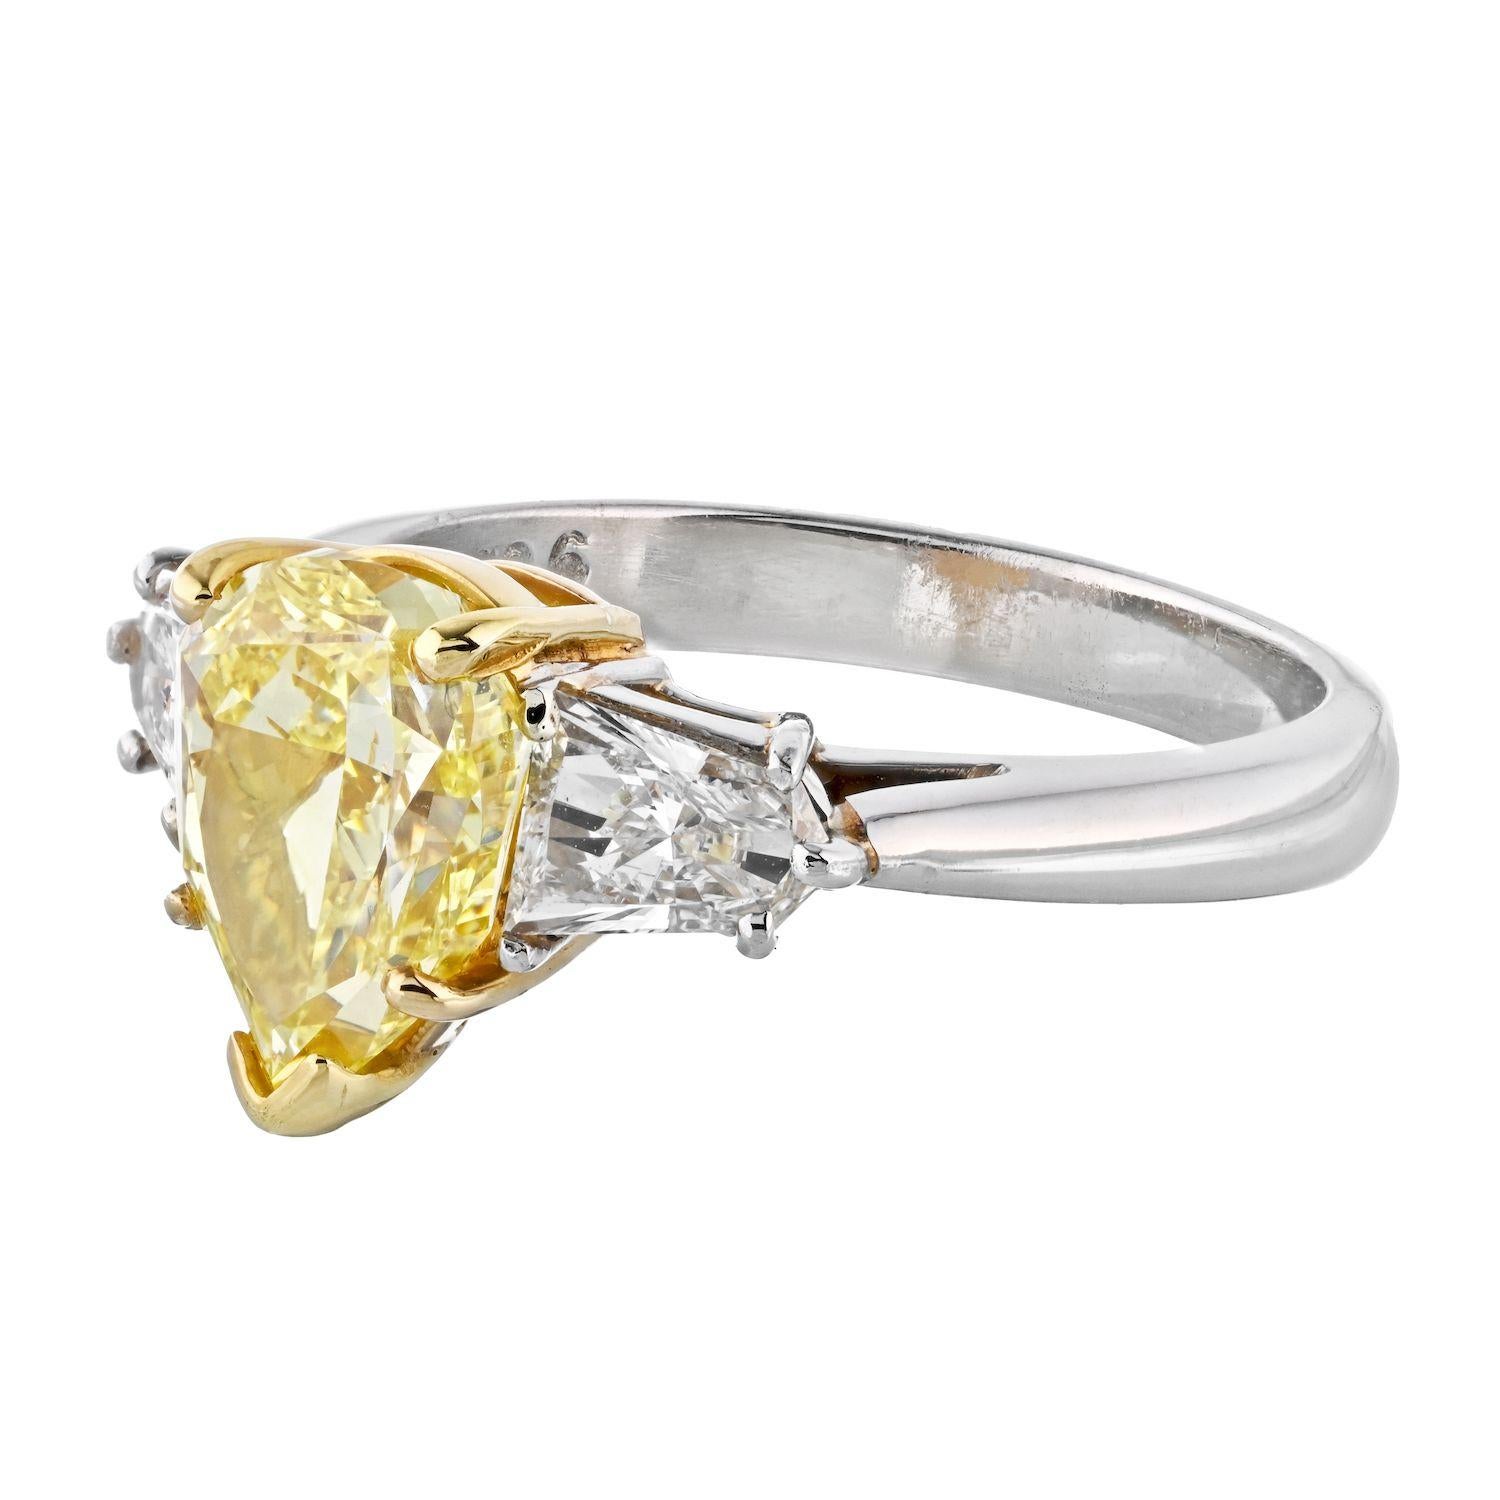 Three stone fancy yellow diamond engagement ring crafted in platinum and 18k yellow gold. Mounted with a 2.24 carat Pear cut natural fancy yellow intense color, VS1 clarity, certified GIA diamond. Side diamonds are natural white diamonds cut in a